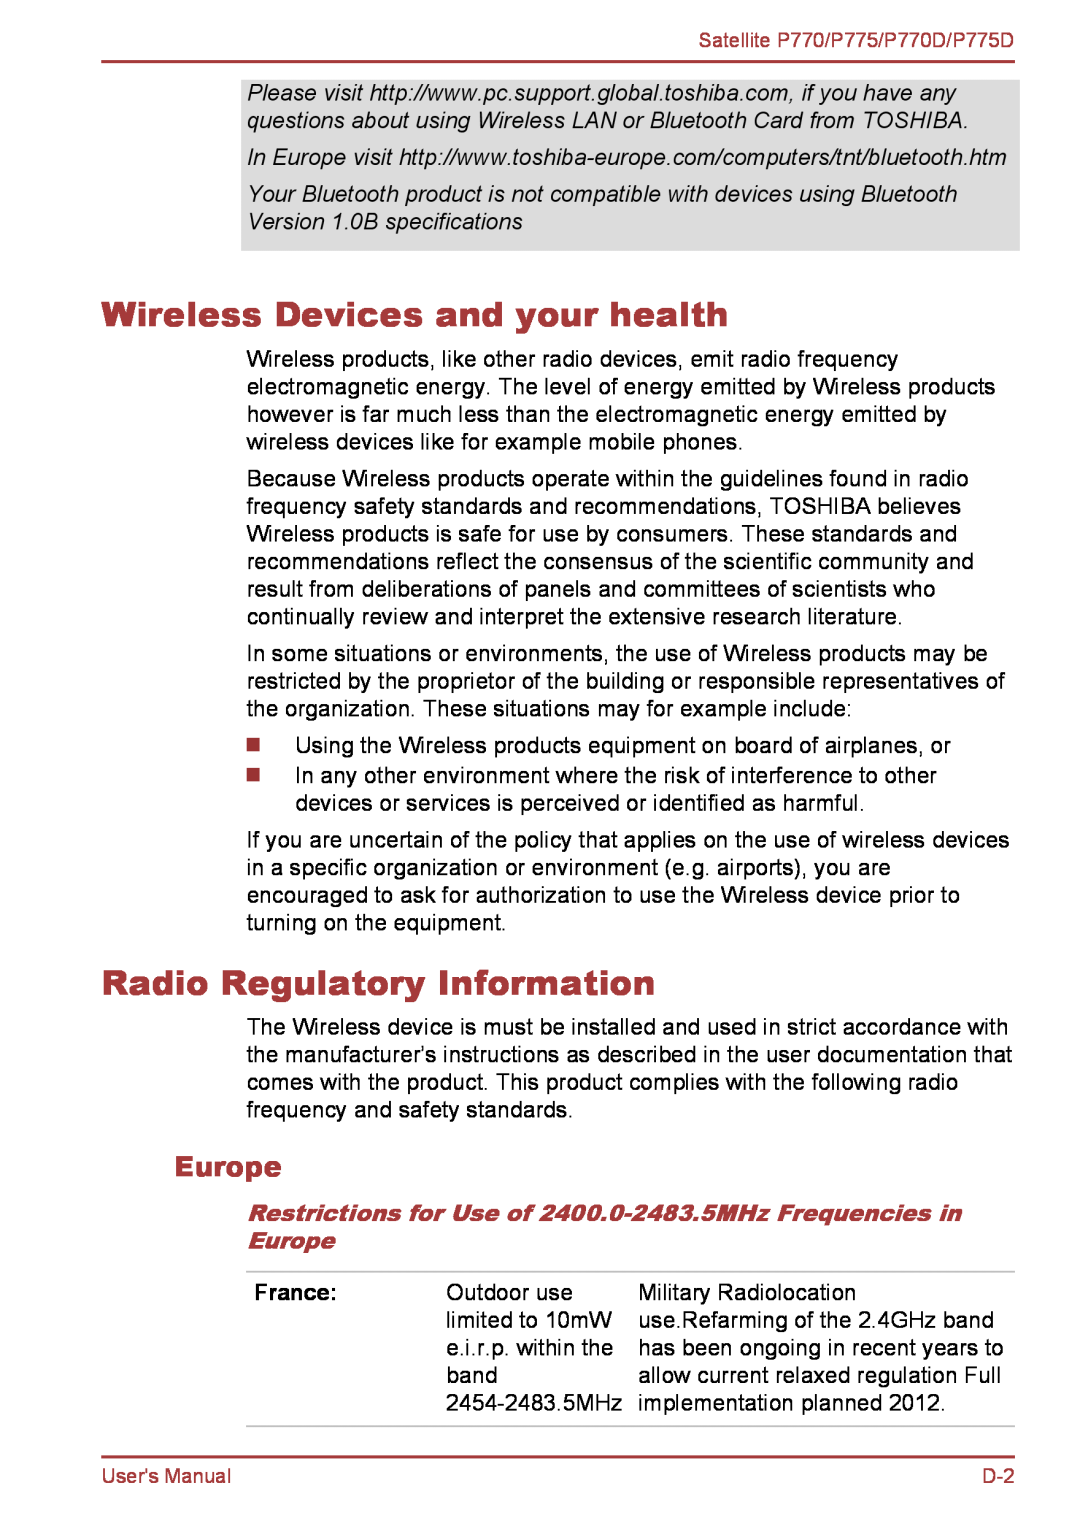 Toshiba P770 user manual Wireless Devices and your health, Radio Regulatory Information, Europe, France 